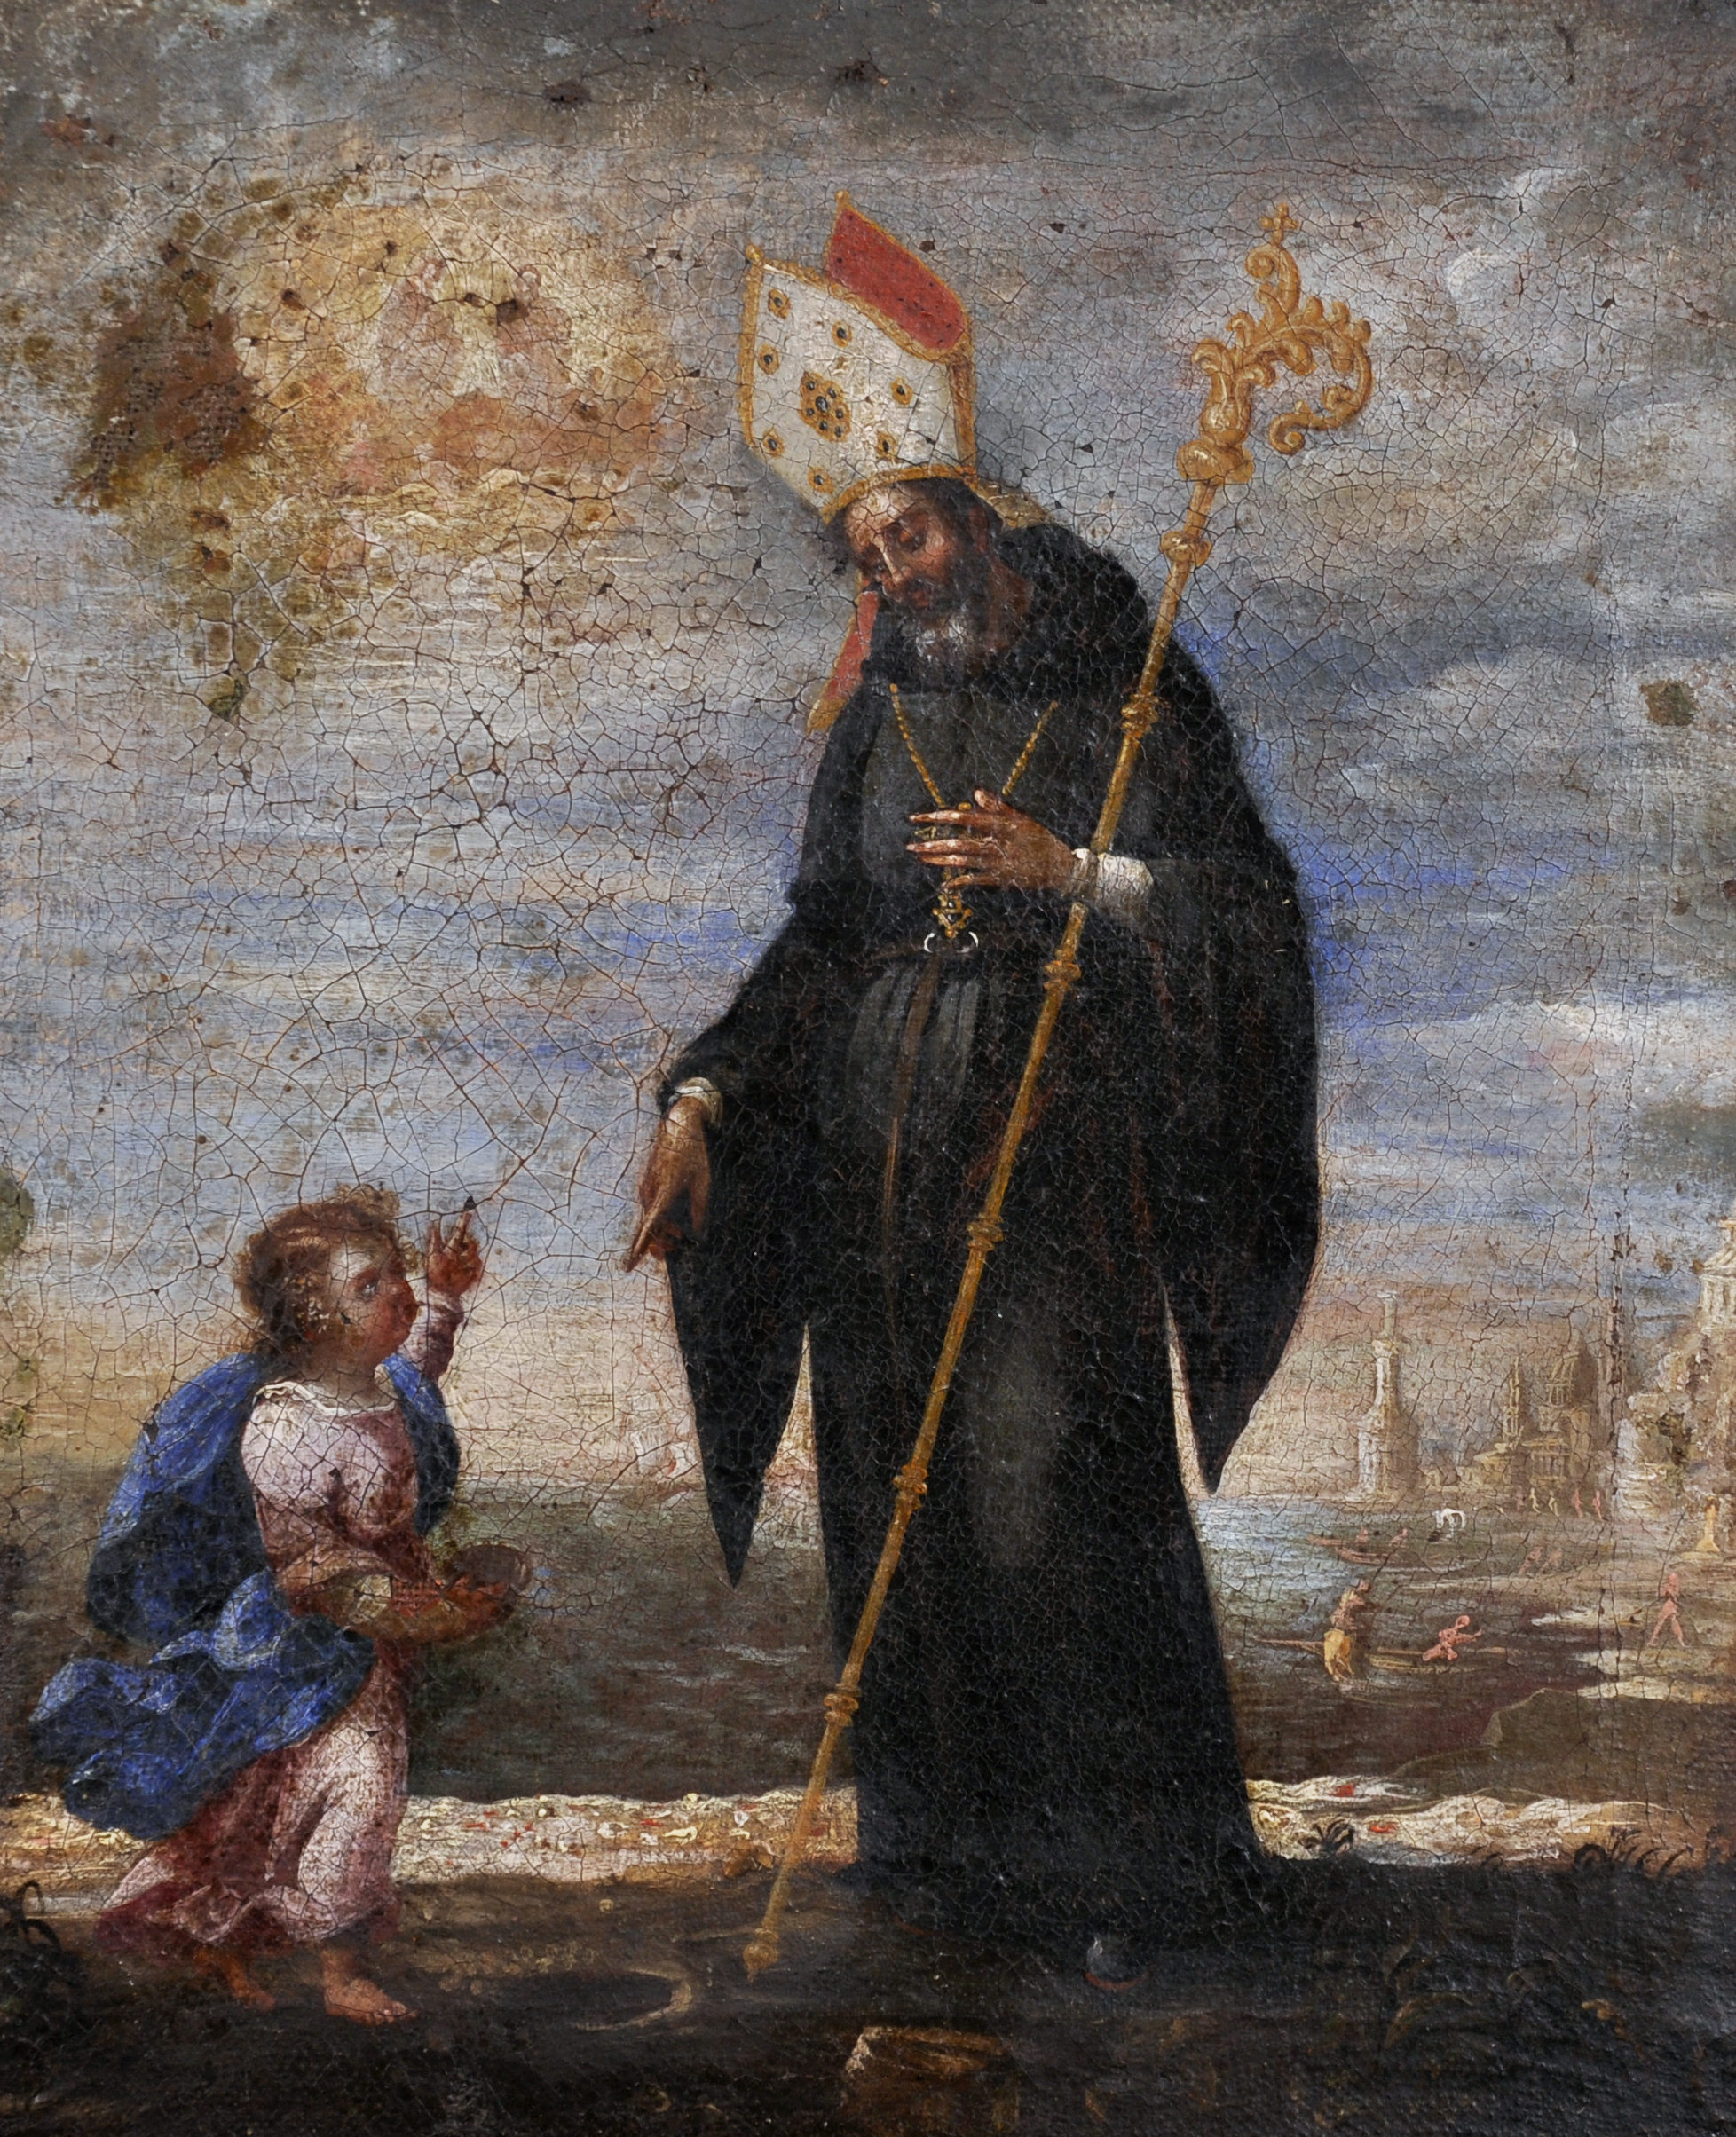 17th Century Italian School. A Priest with a Small Child, Oil on Canvas, Unframed, 11.75” x 9.75” (